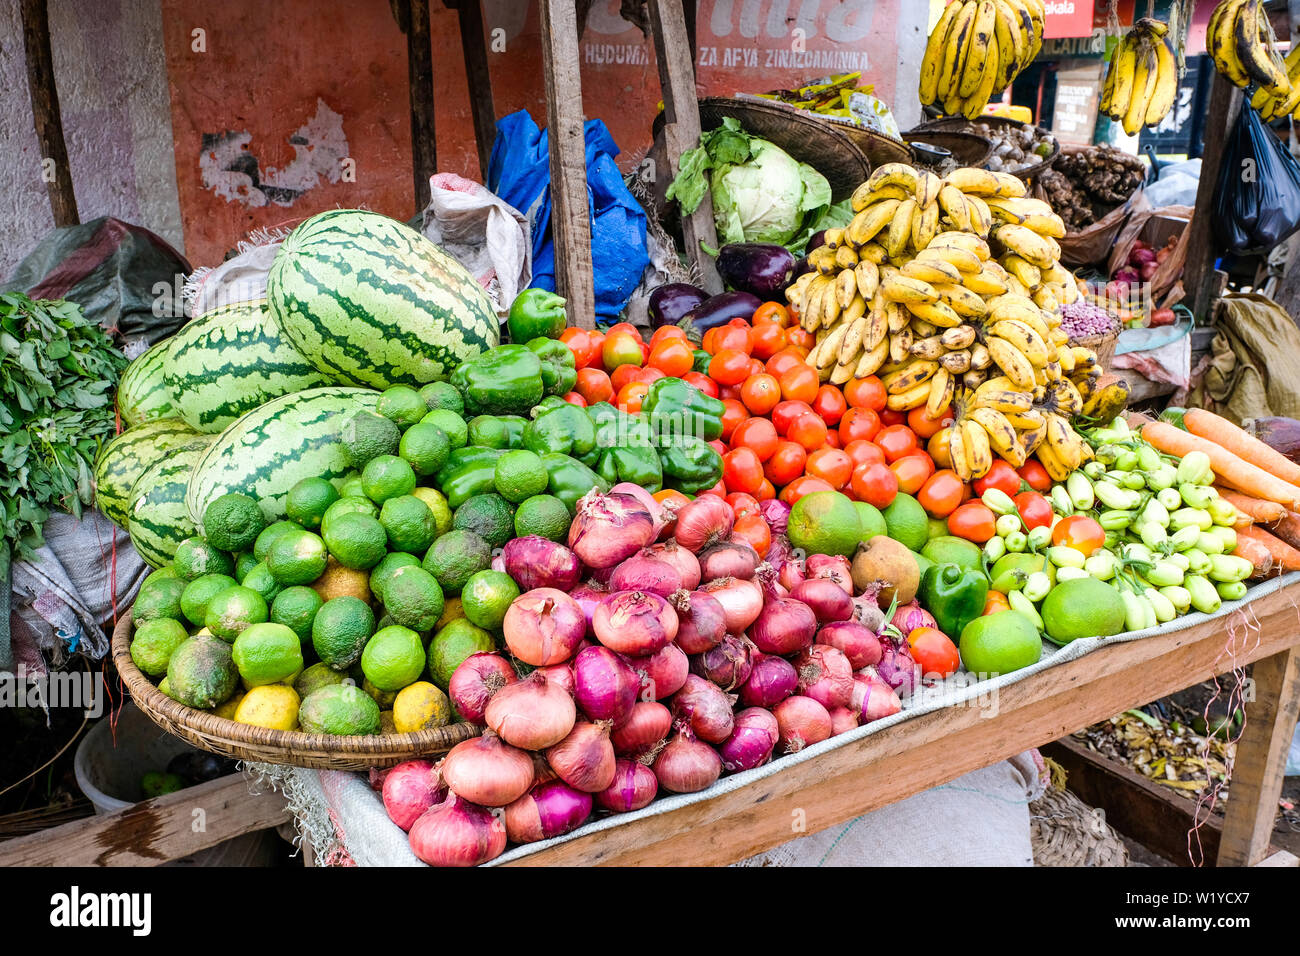 Fruit and vegetable stall in Mbeya, Tanzania., Africa   ---   Obst- und Gemüsestand in Mbeya, Tansania. Stock Photo